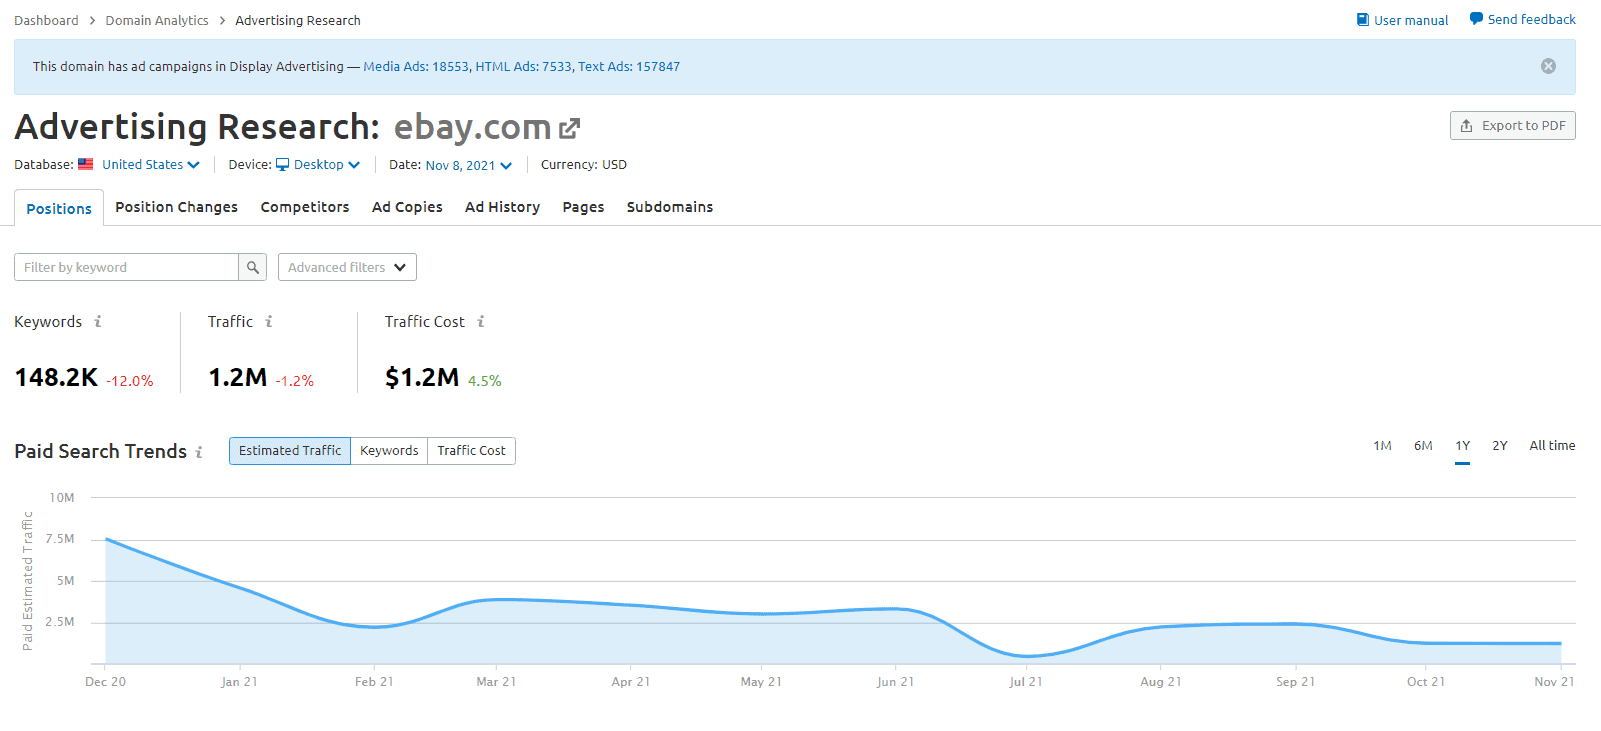 Semrush Advertising Research dashboard, showing results for eBay.com. Data includes Keywords, Traffic, Traffic Cost, and Paid Search Traffic over one year.